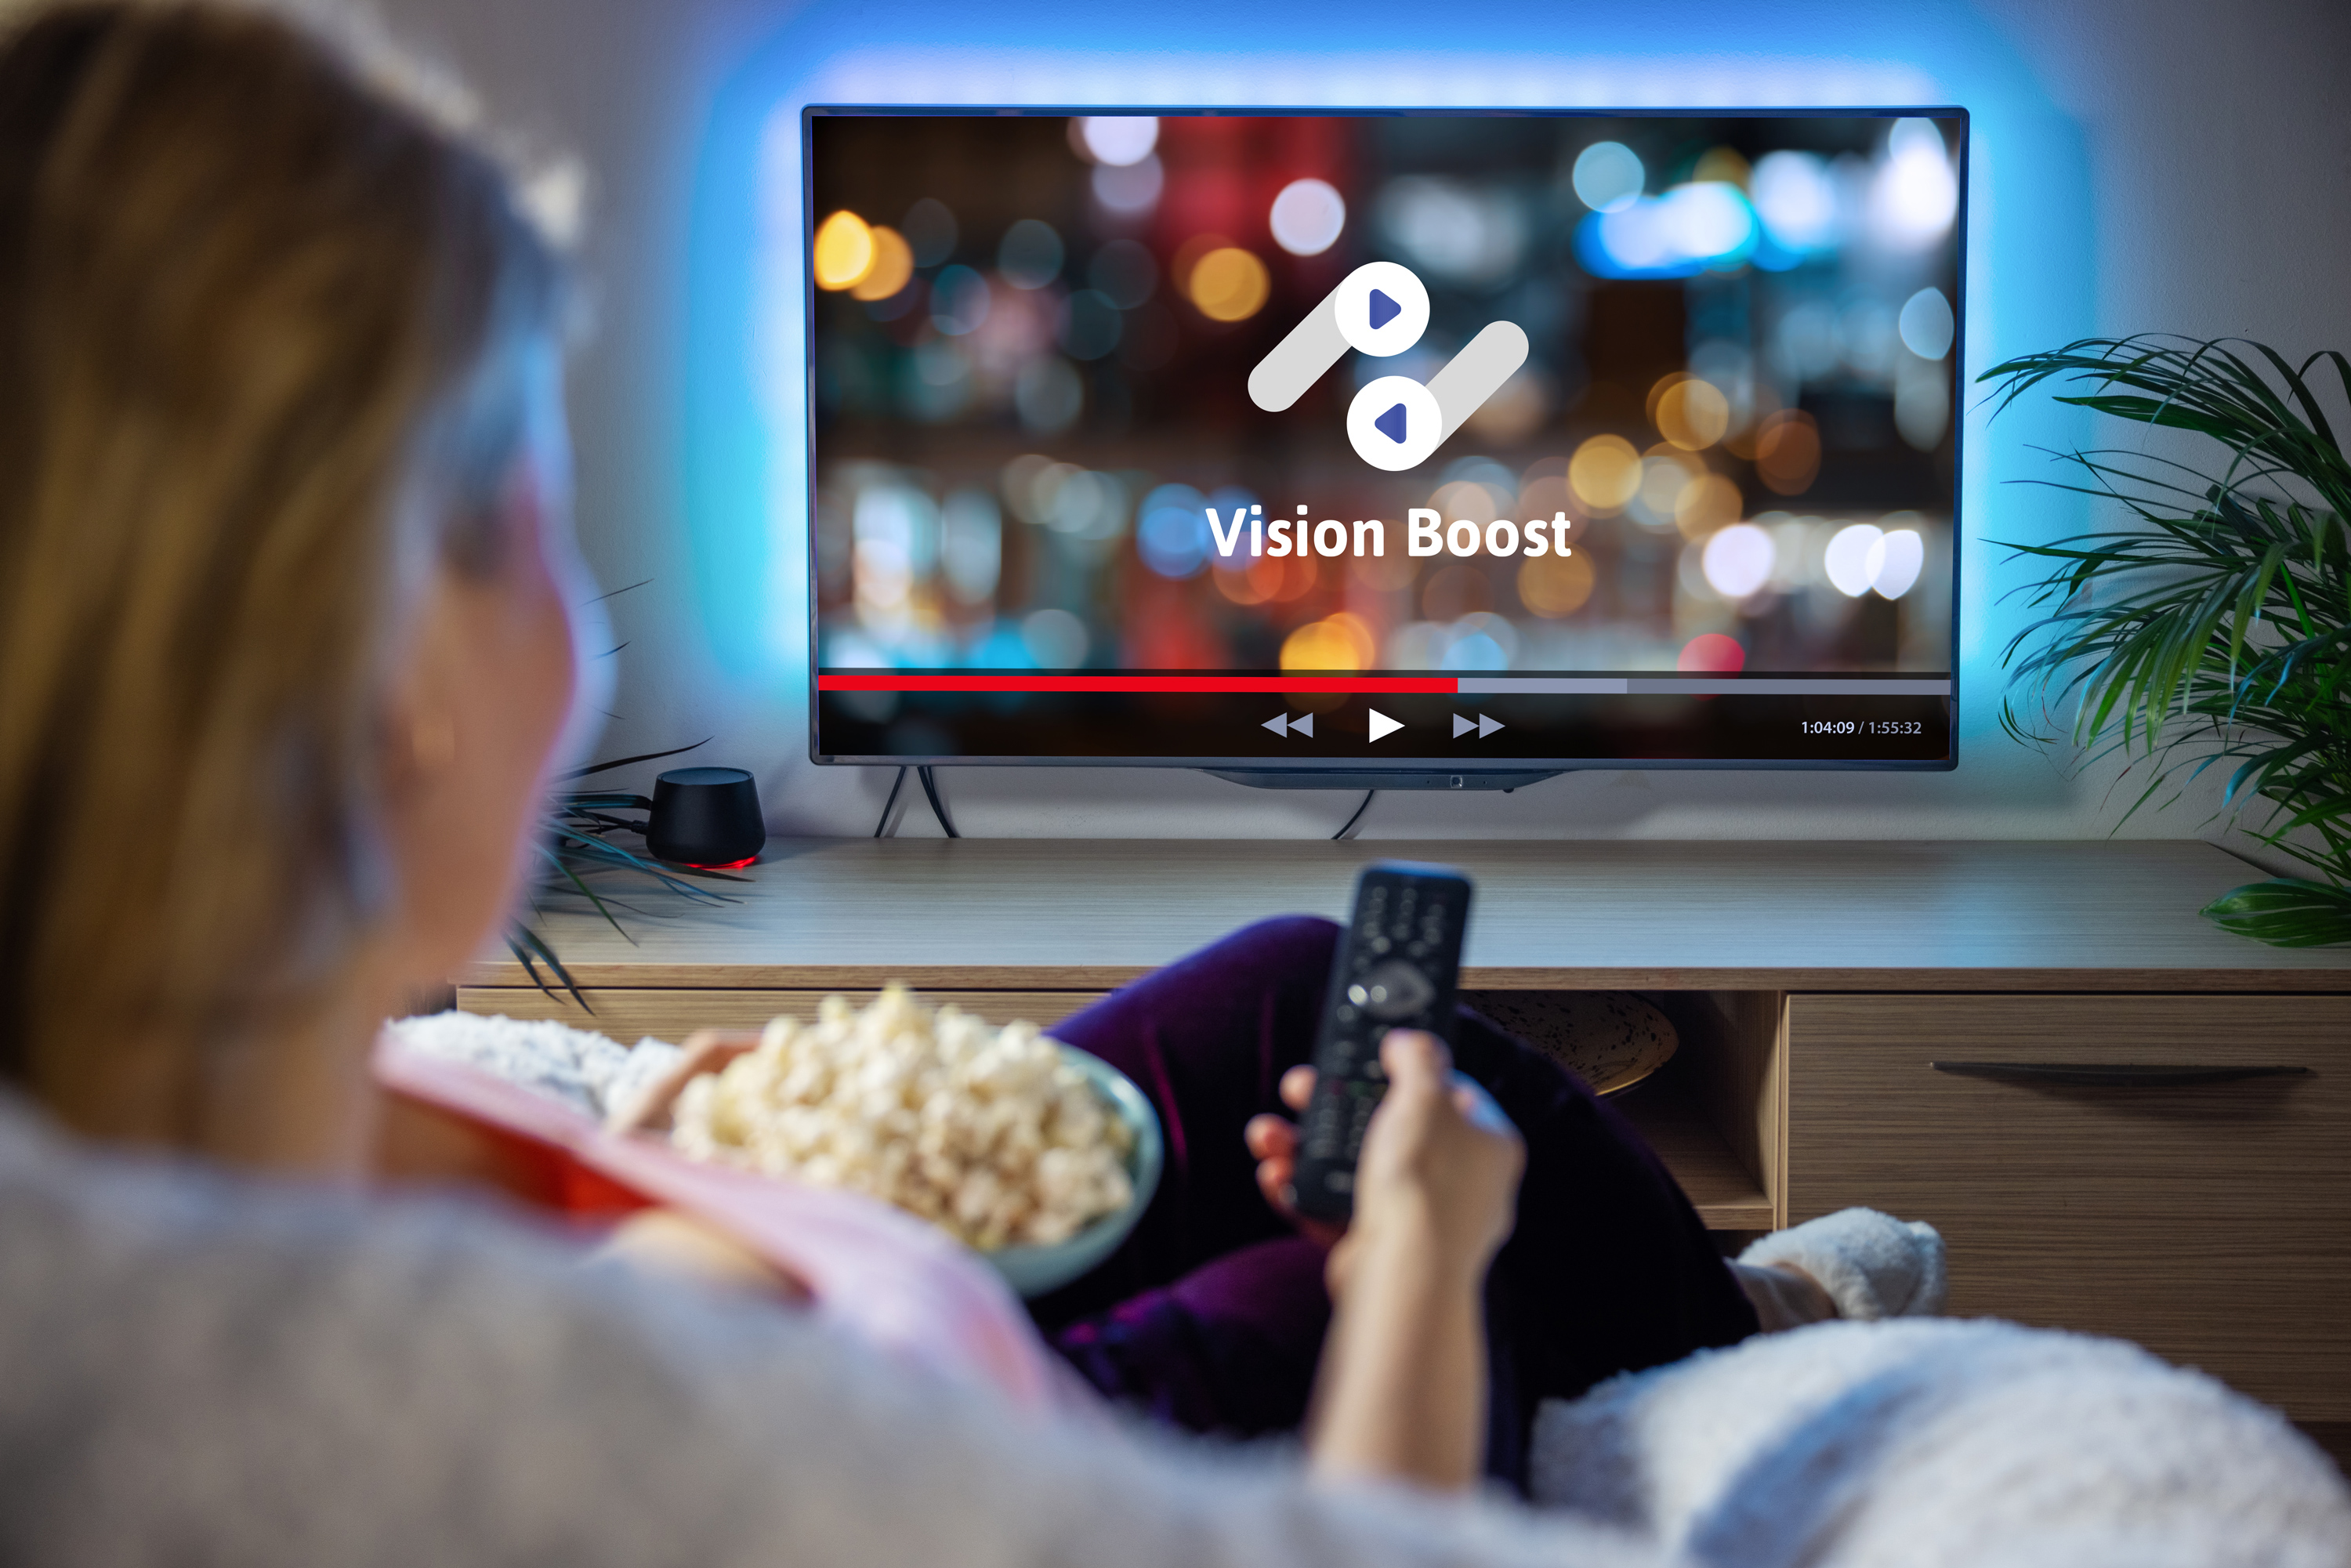 Watching TV with Vision Boost